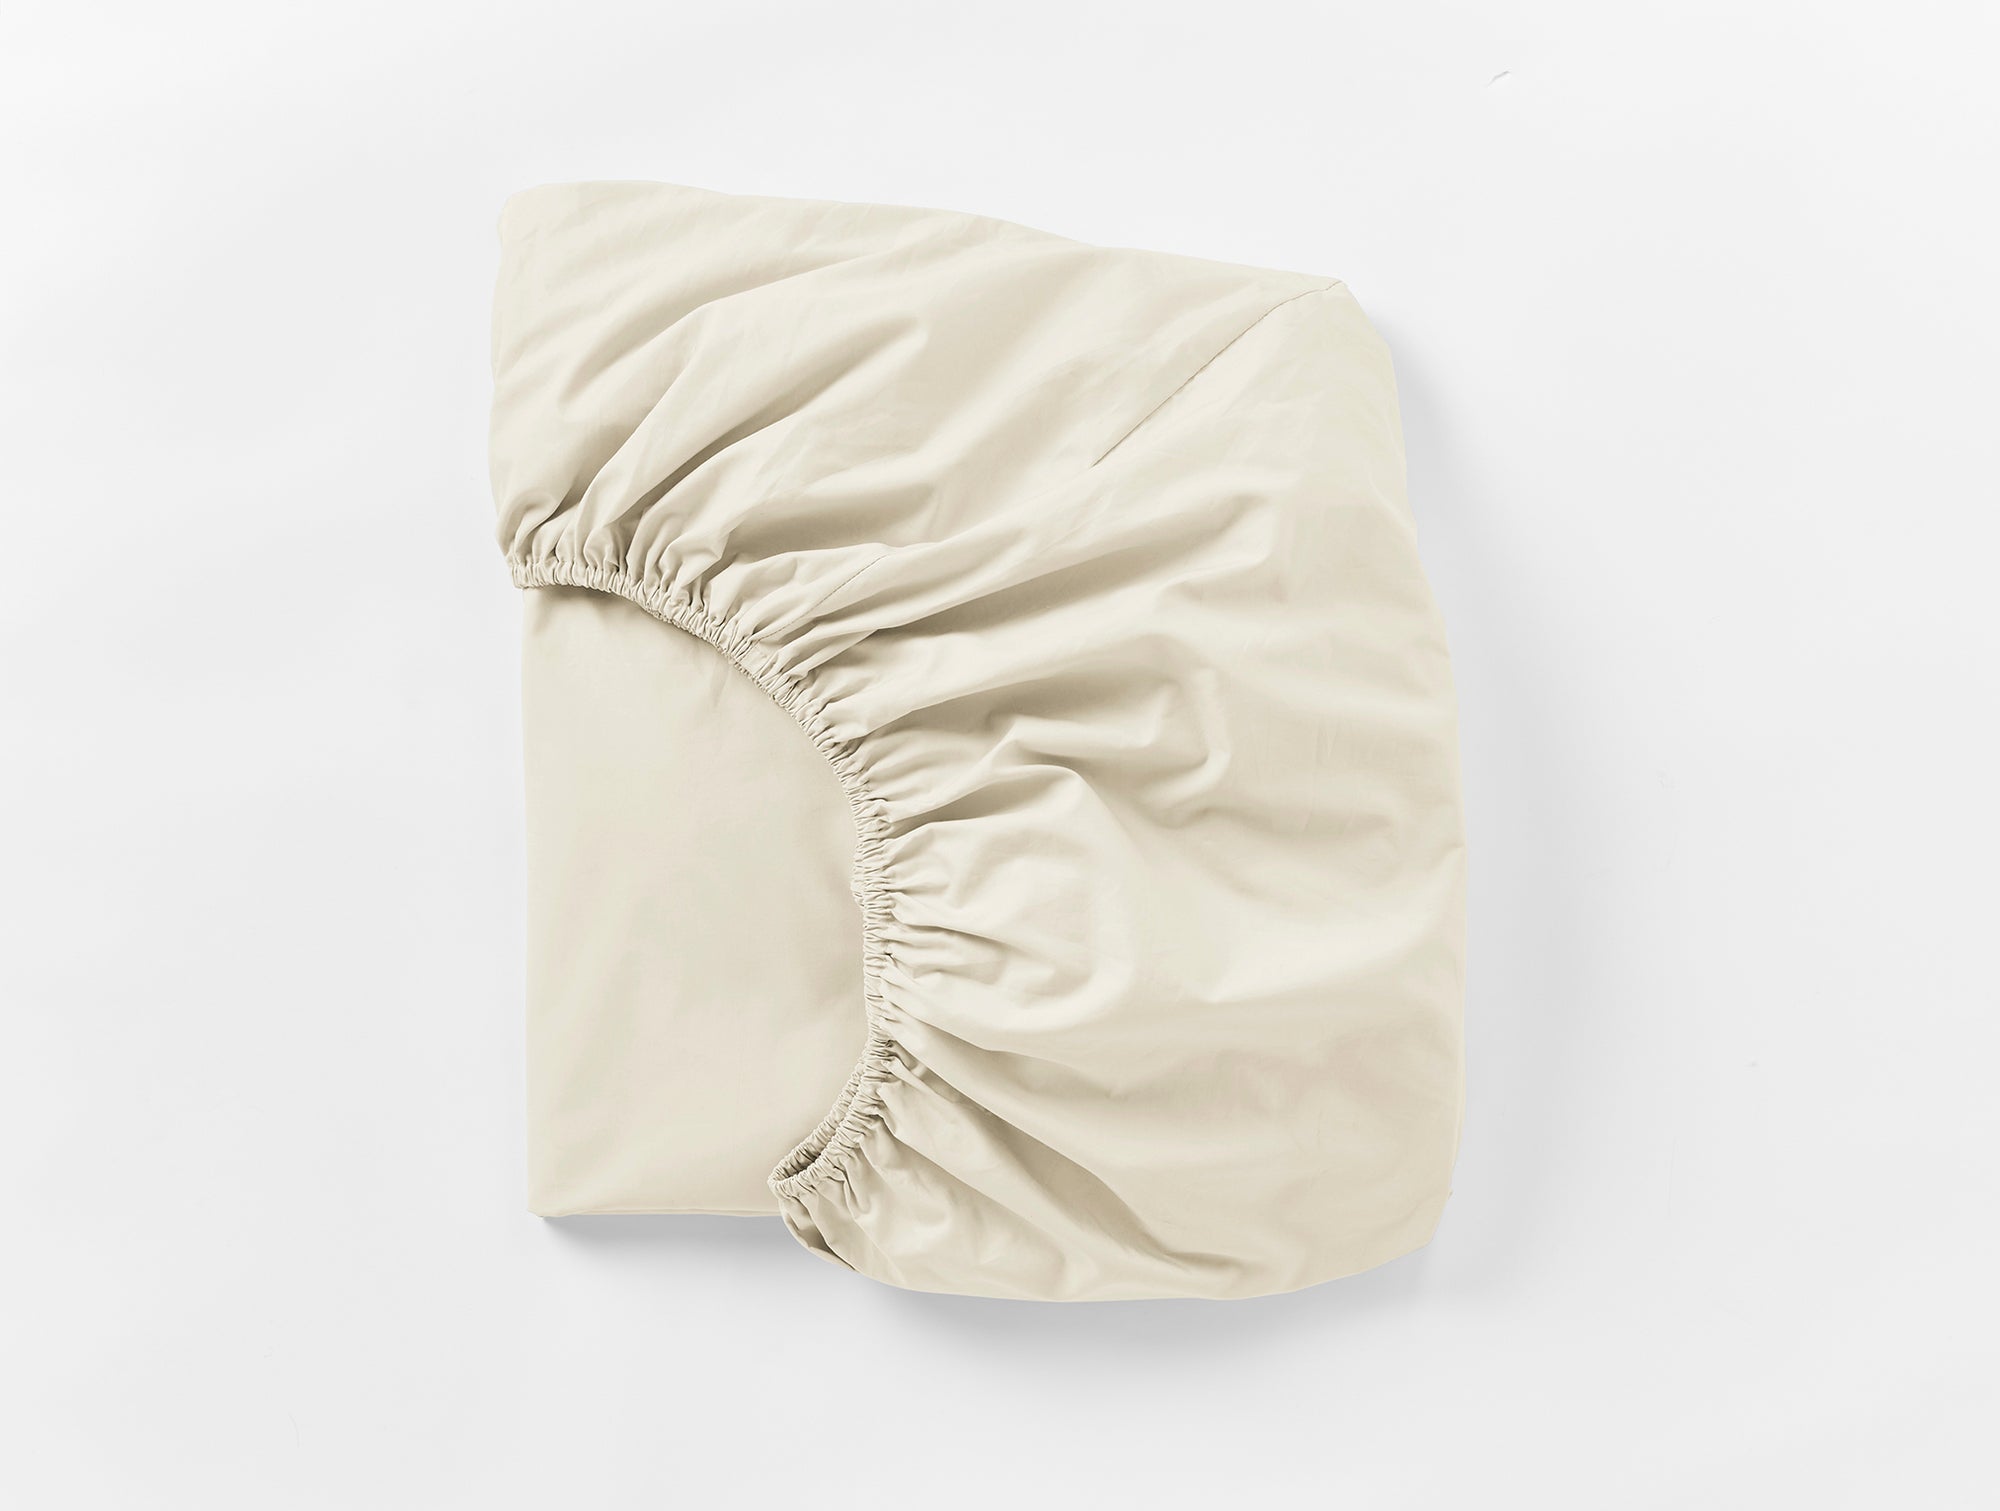 300 Thread Count Organic Percale Fitted Sheets 